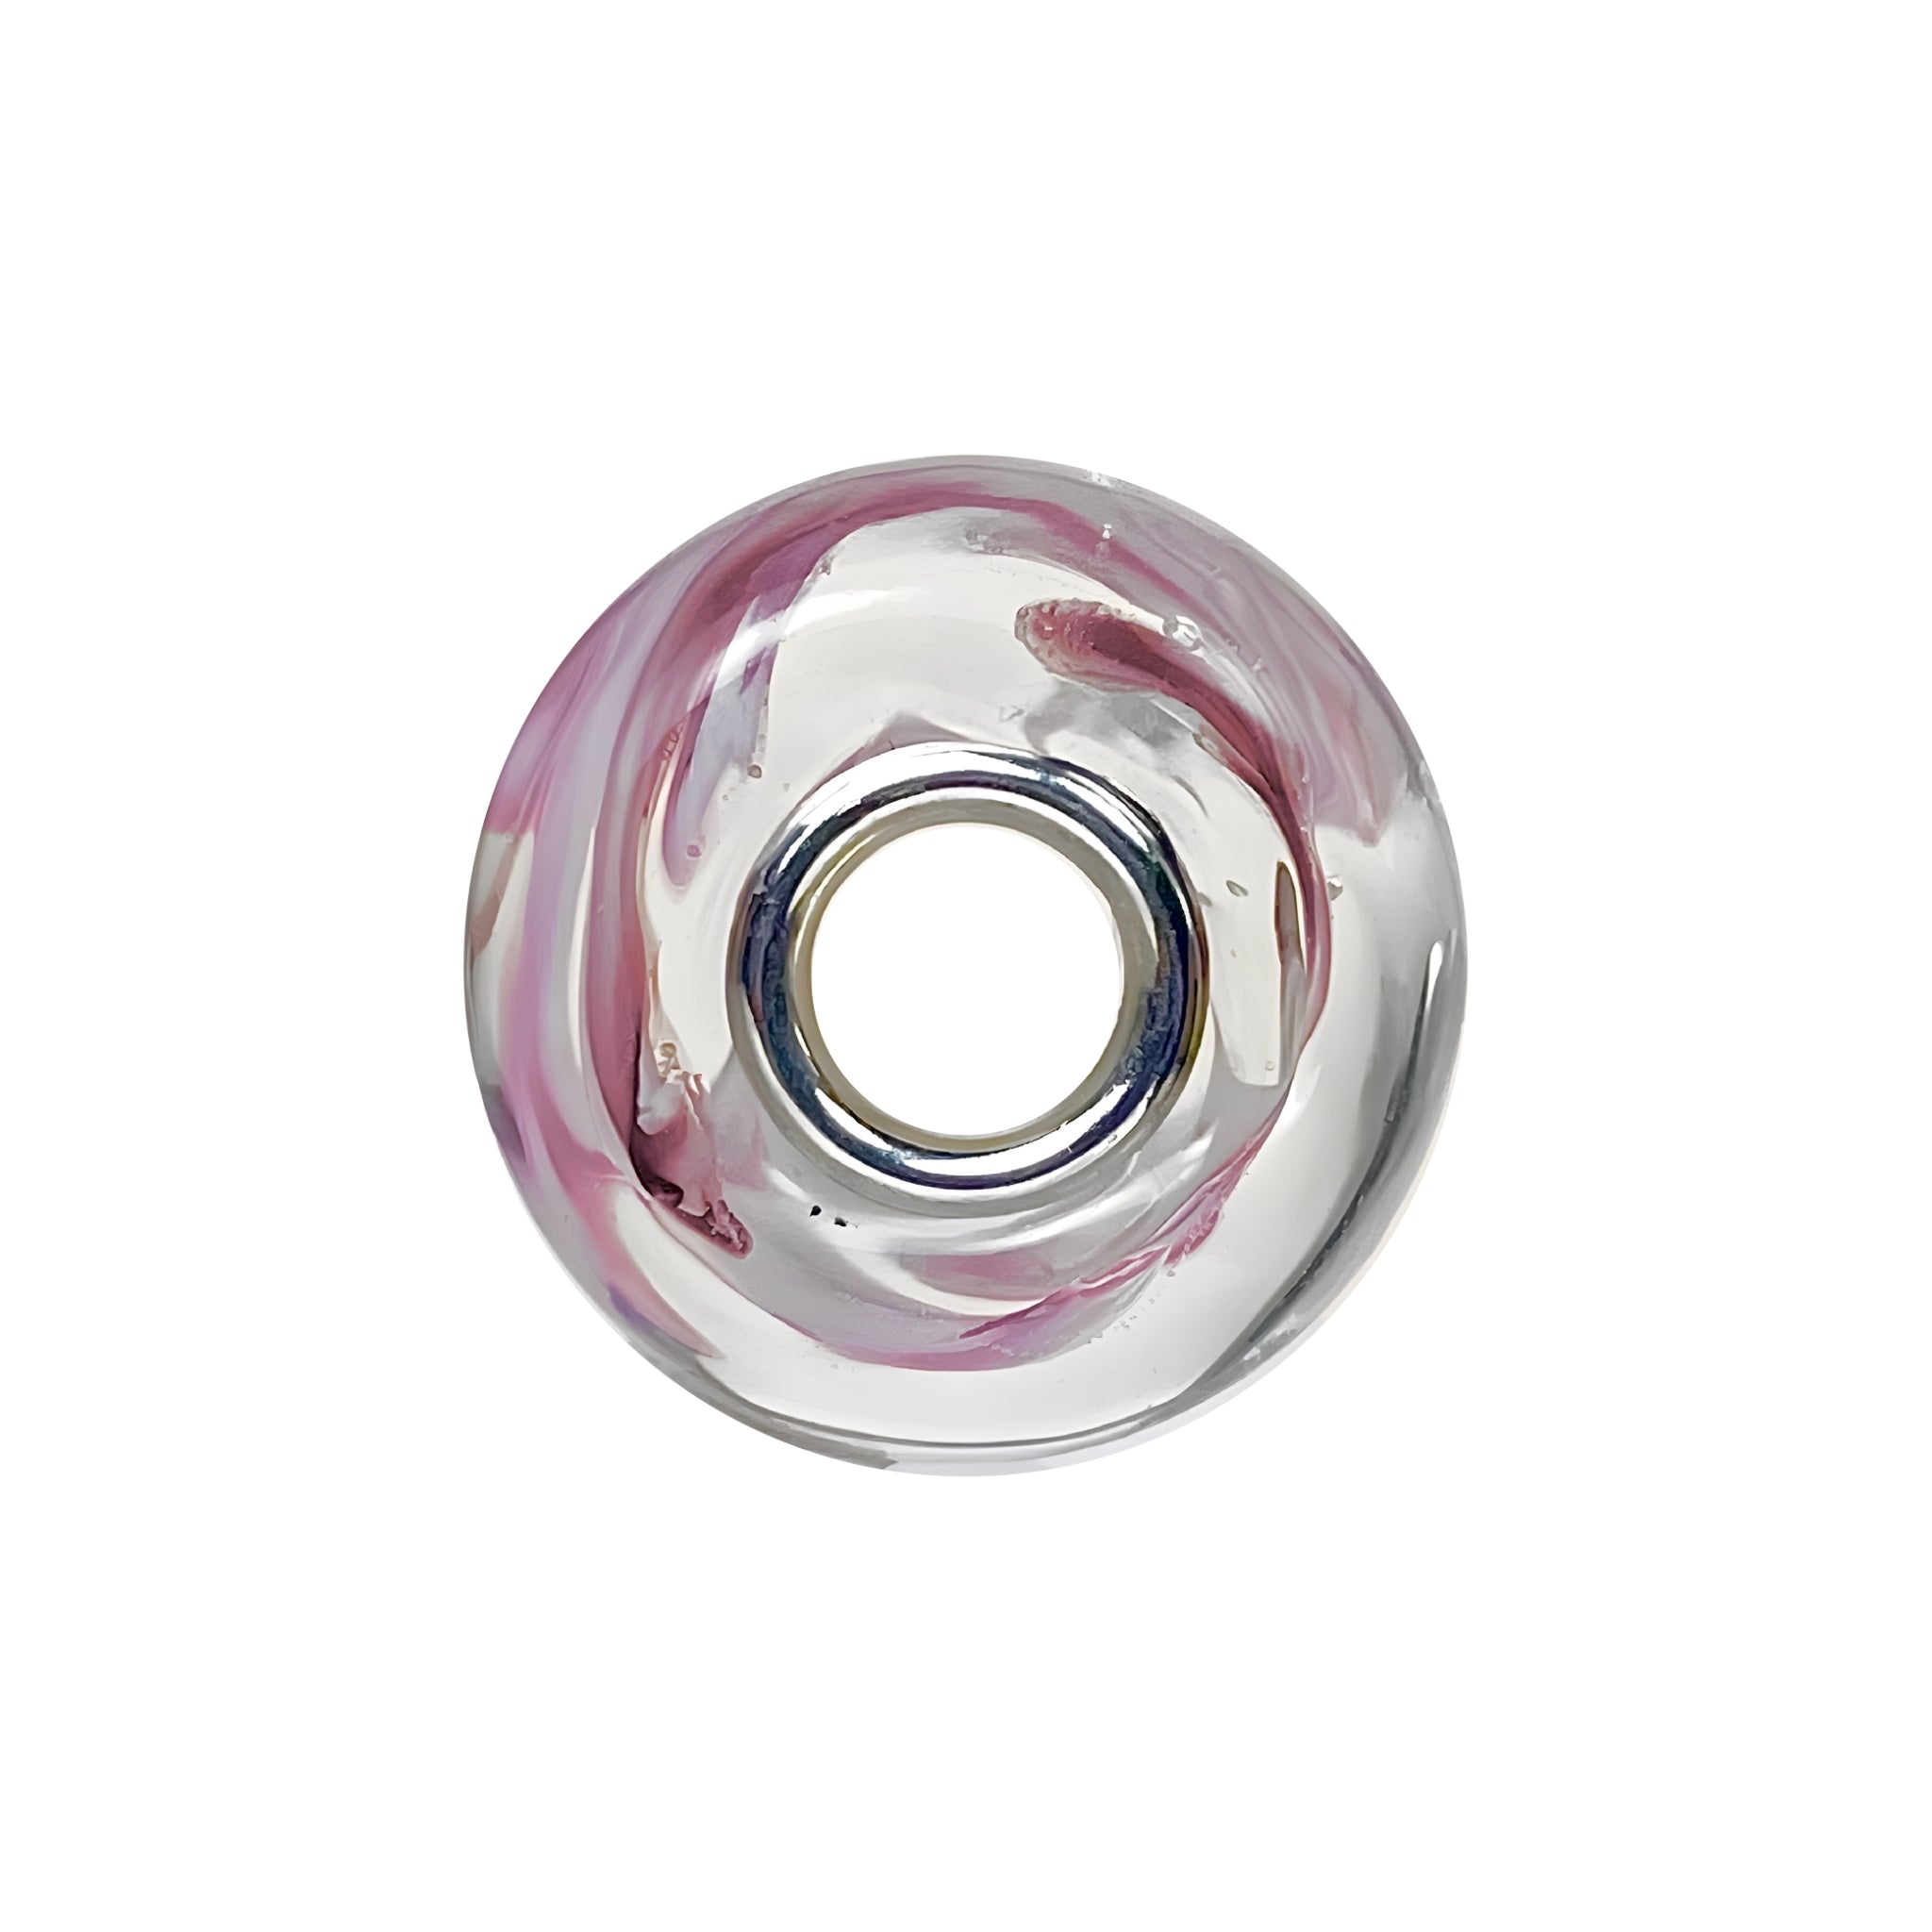 Marble Glass Bead Pink